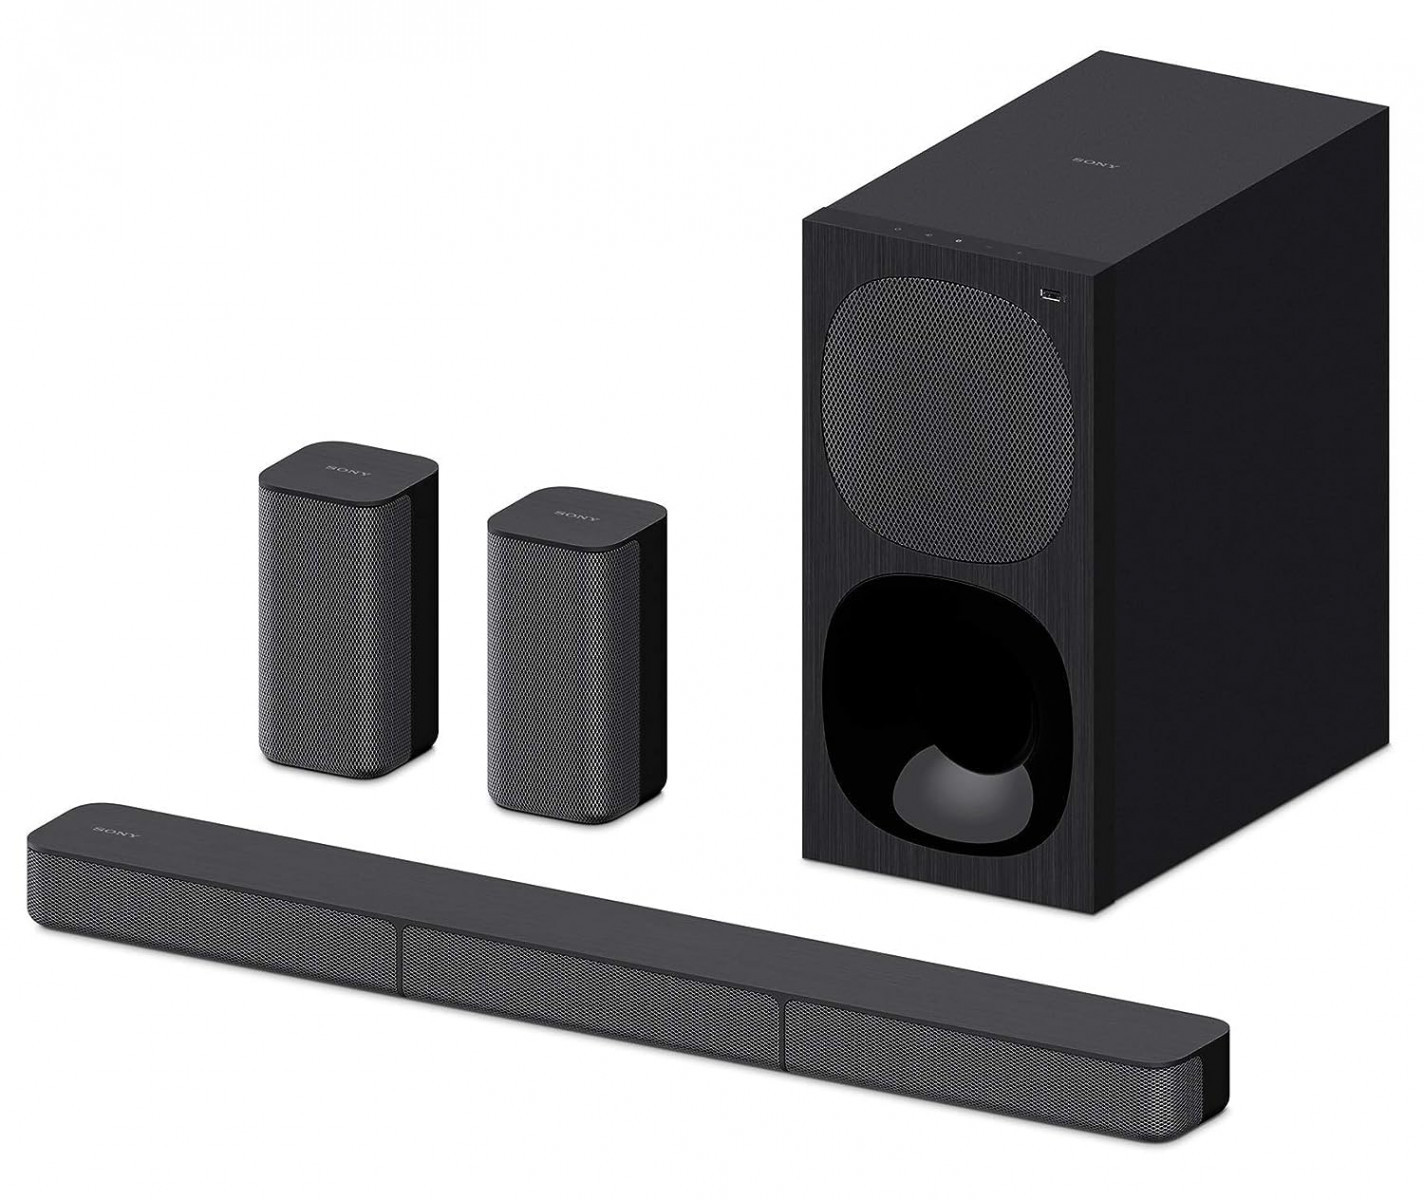 Sony HT-S20R Real 51ch Dolby Digital Soundbar for TV with subwoofer and Compact Rear Speakers 51ch Home Theatre System 400WBluetooth  USB Connectivity HDMI  Optical connectivity